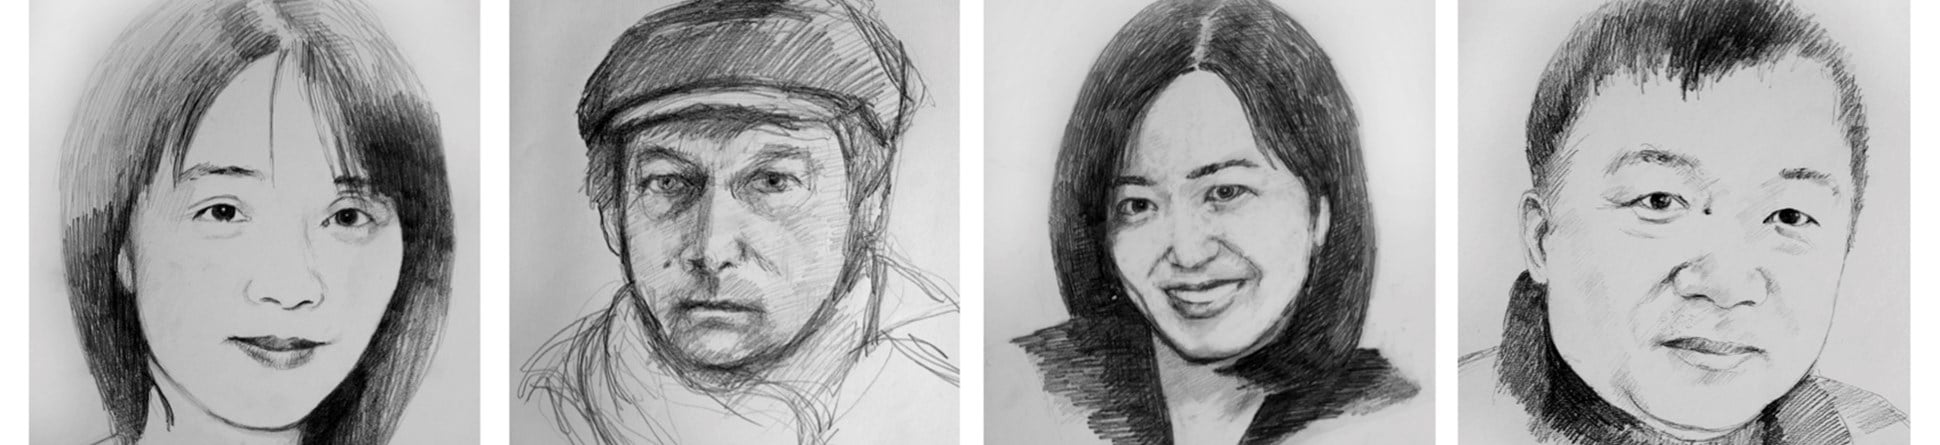 Pencil sketches of the 8 members of the Chinese footprints project team:
Chungwen
Ryszard
Aubrey
Ricky
Haiping
Martin
Lucia
Kahfei